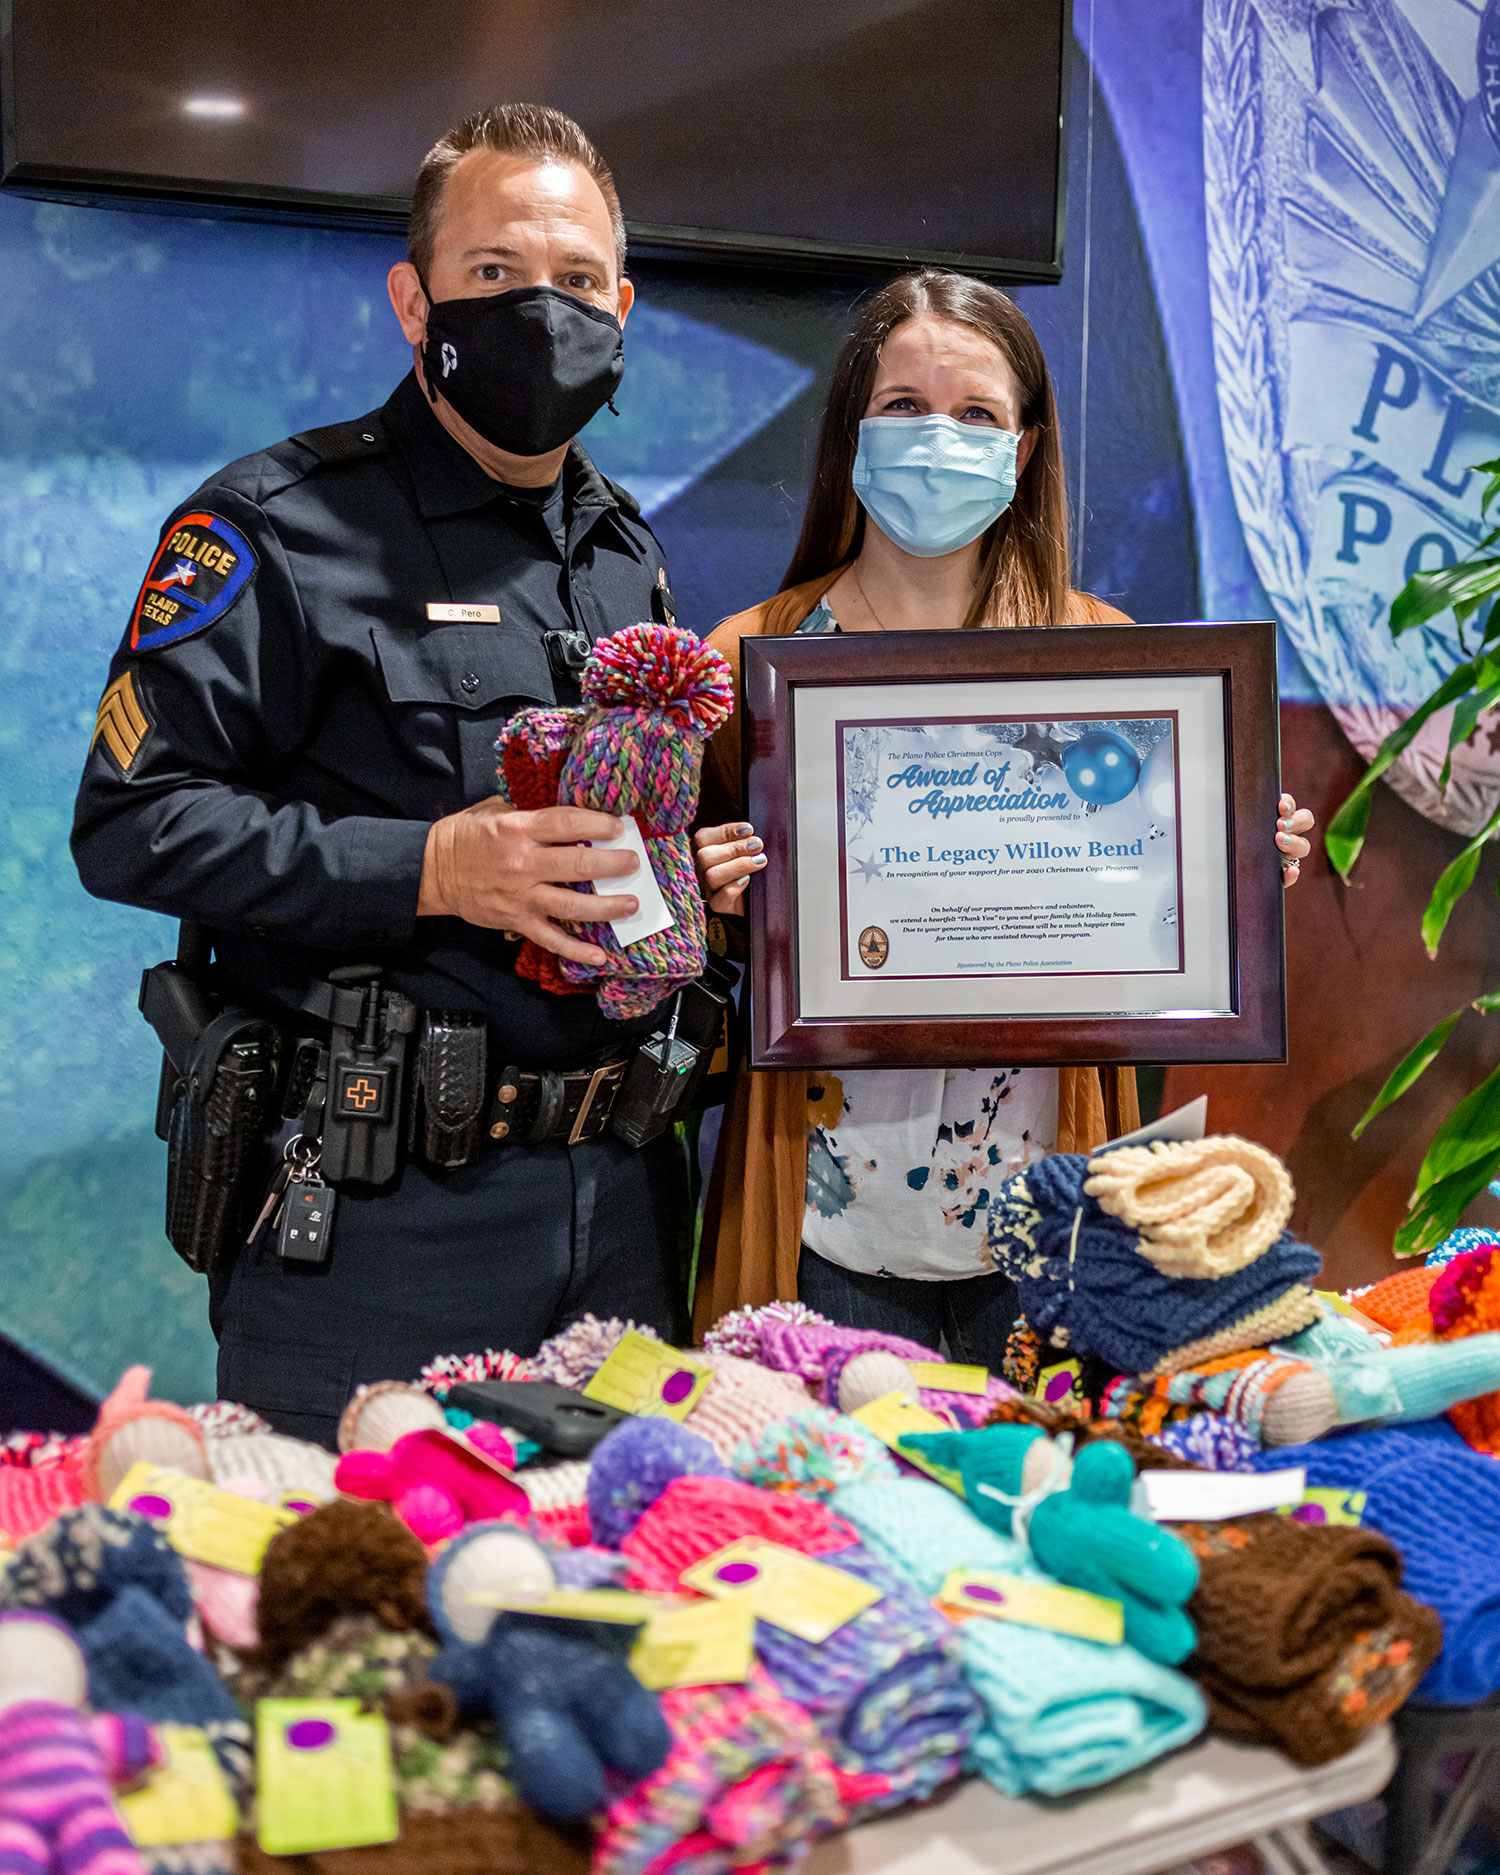 Rivae Campo, volunteer manager at The Legacy Senior Communities, presents hand-knitted items to Plano Police Officer Courtney Pero